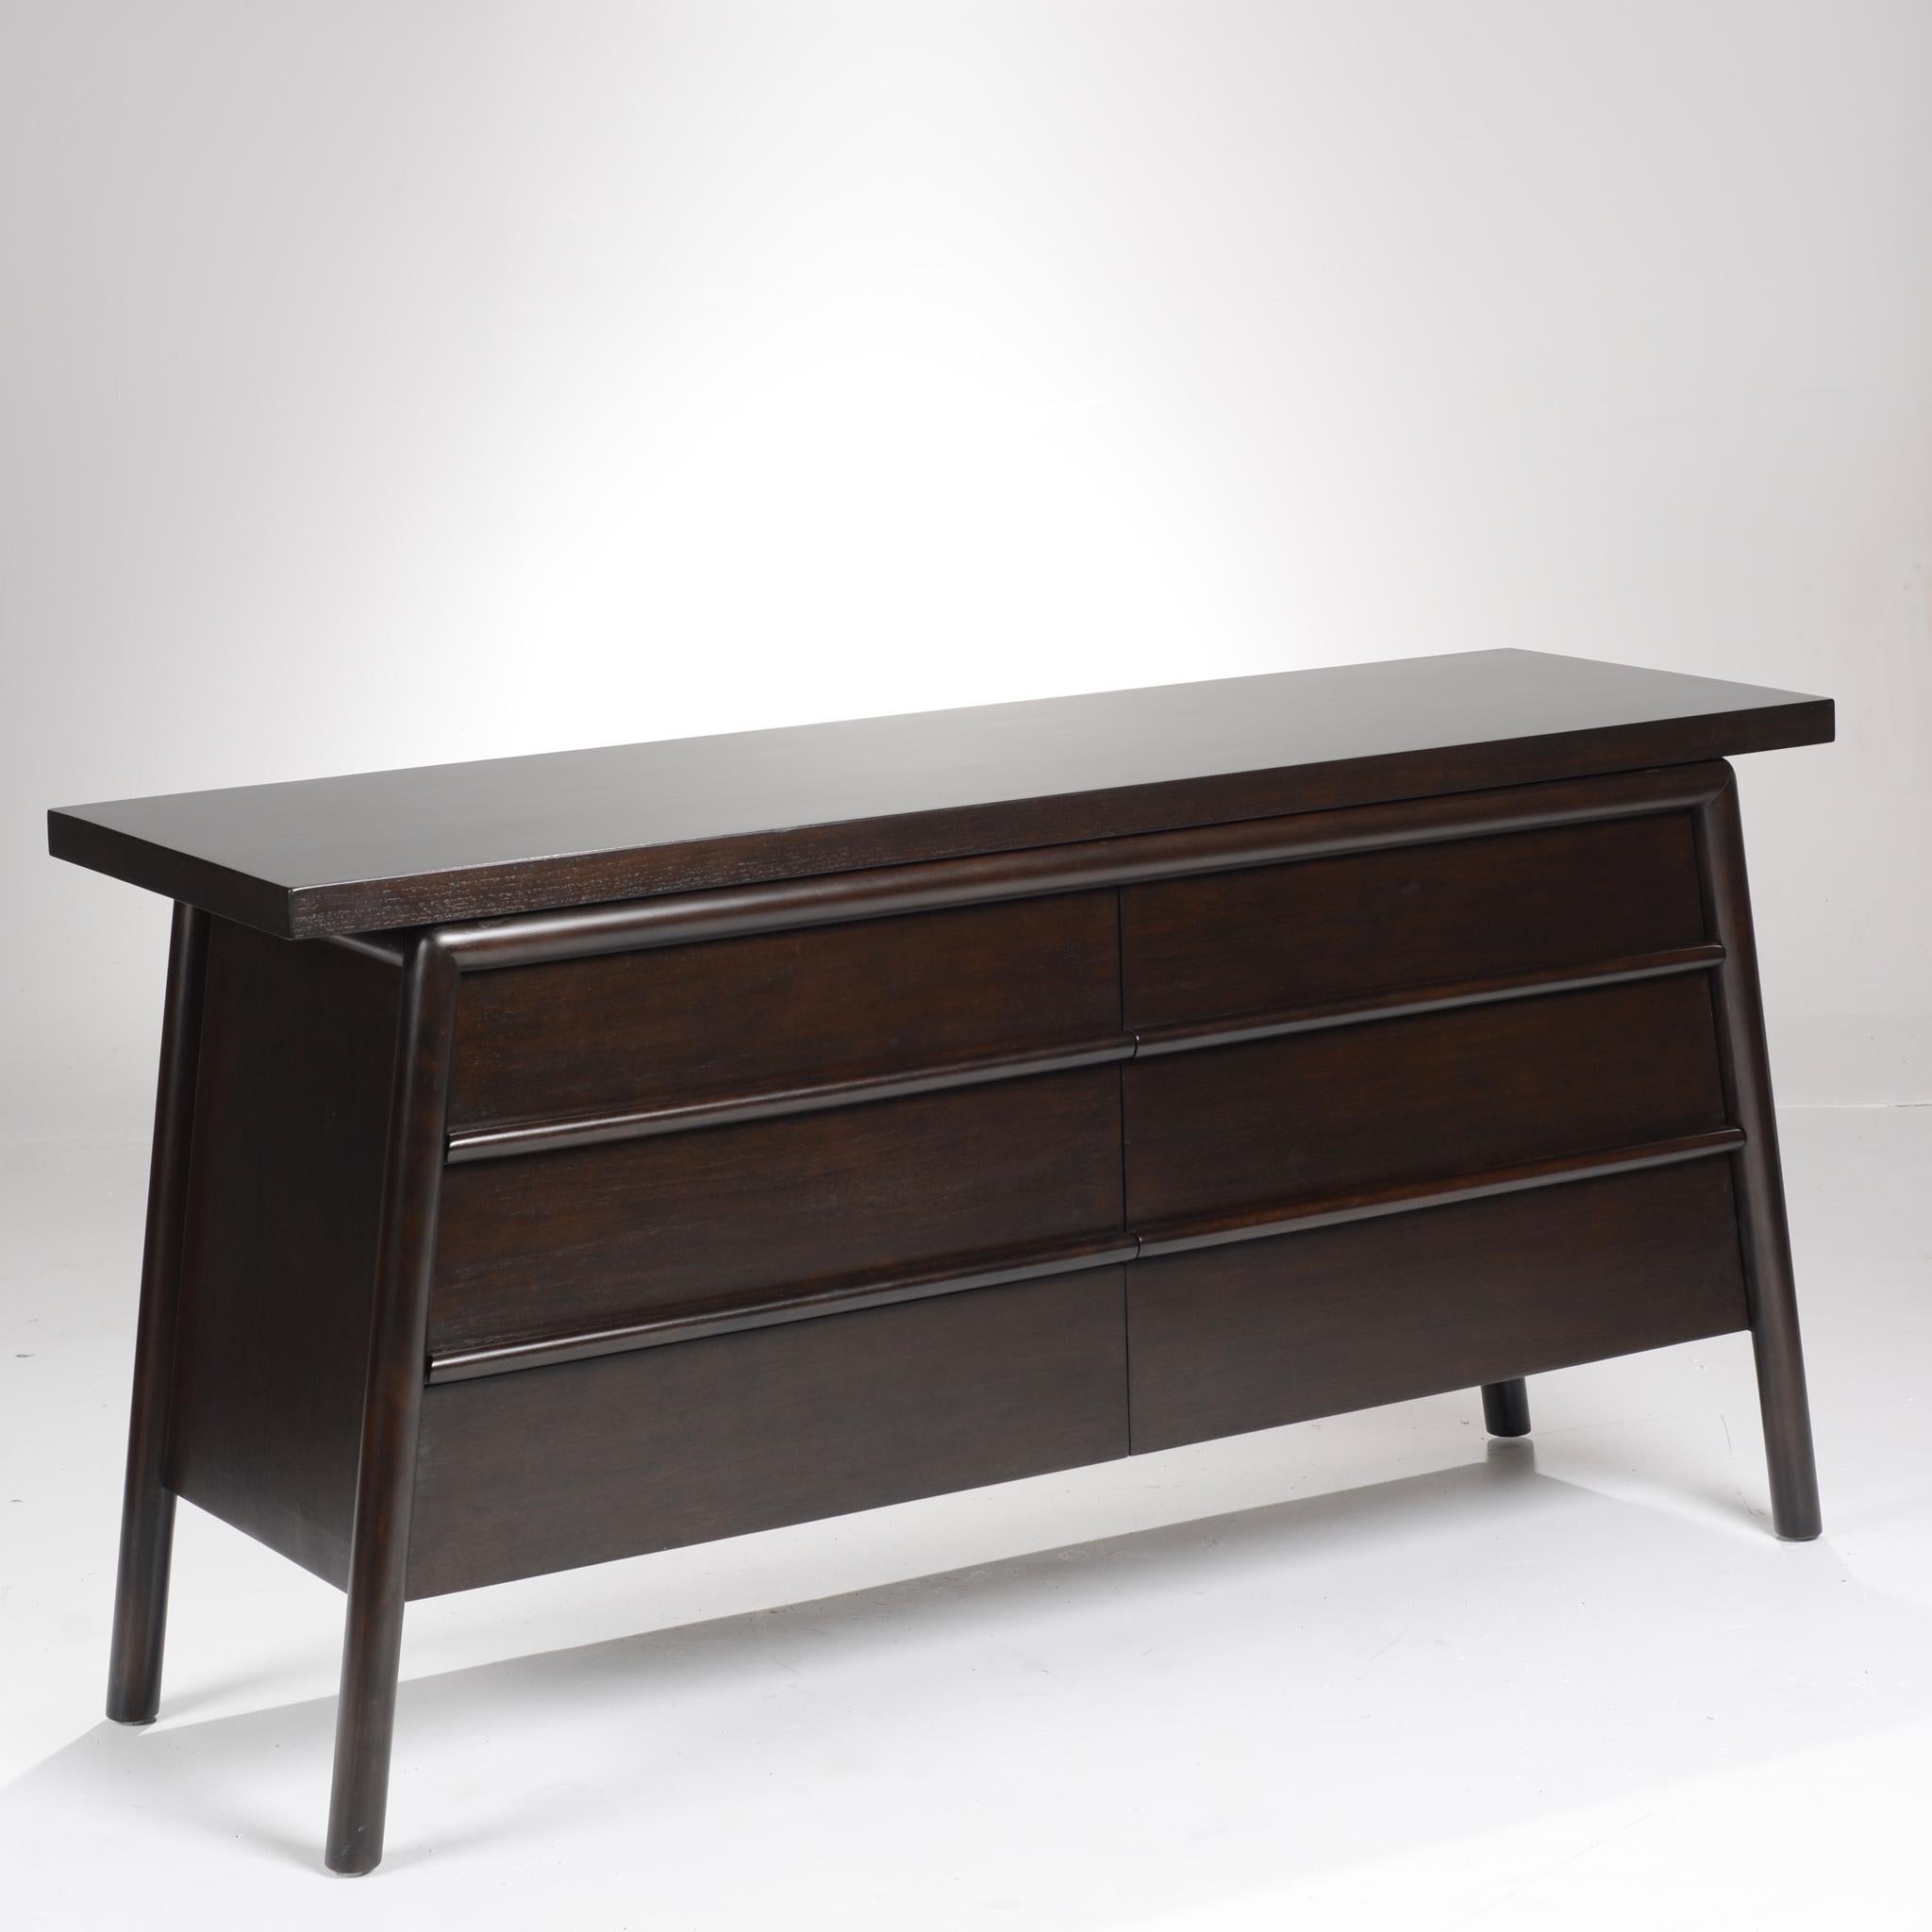 T.H. Robsjohn-Gibbings for Widdicomb ebonized mahogany six-drawer credenza with slab top and canted legs in really great condition. 

All items are viewable at our Los Angeles Arts District showroom and warehouse. 